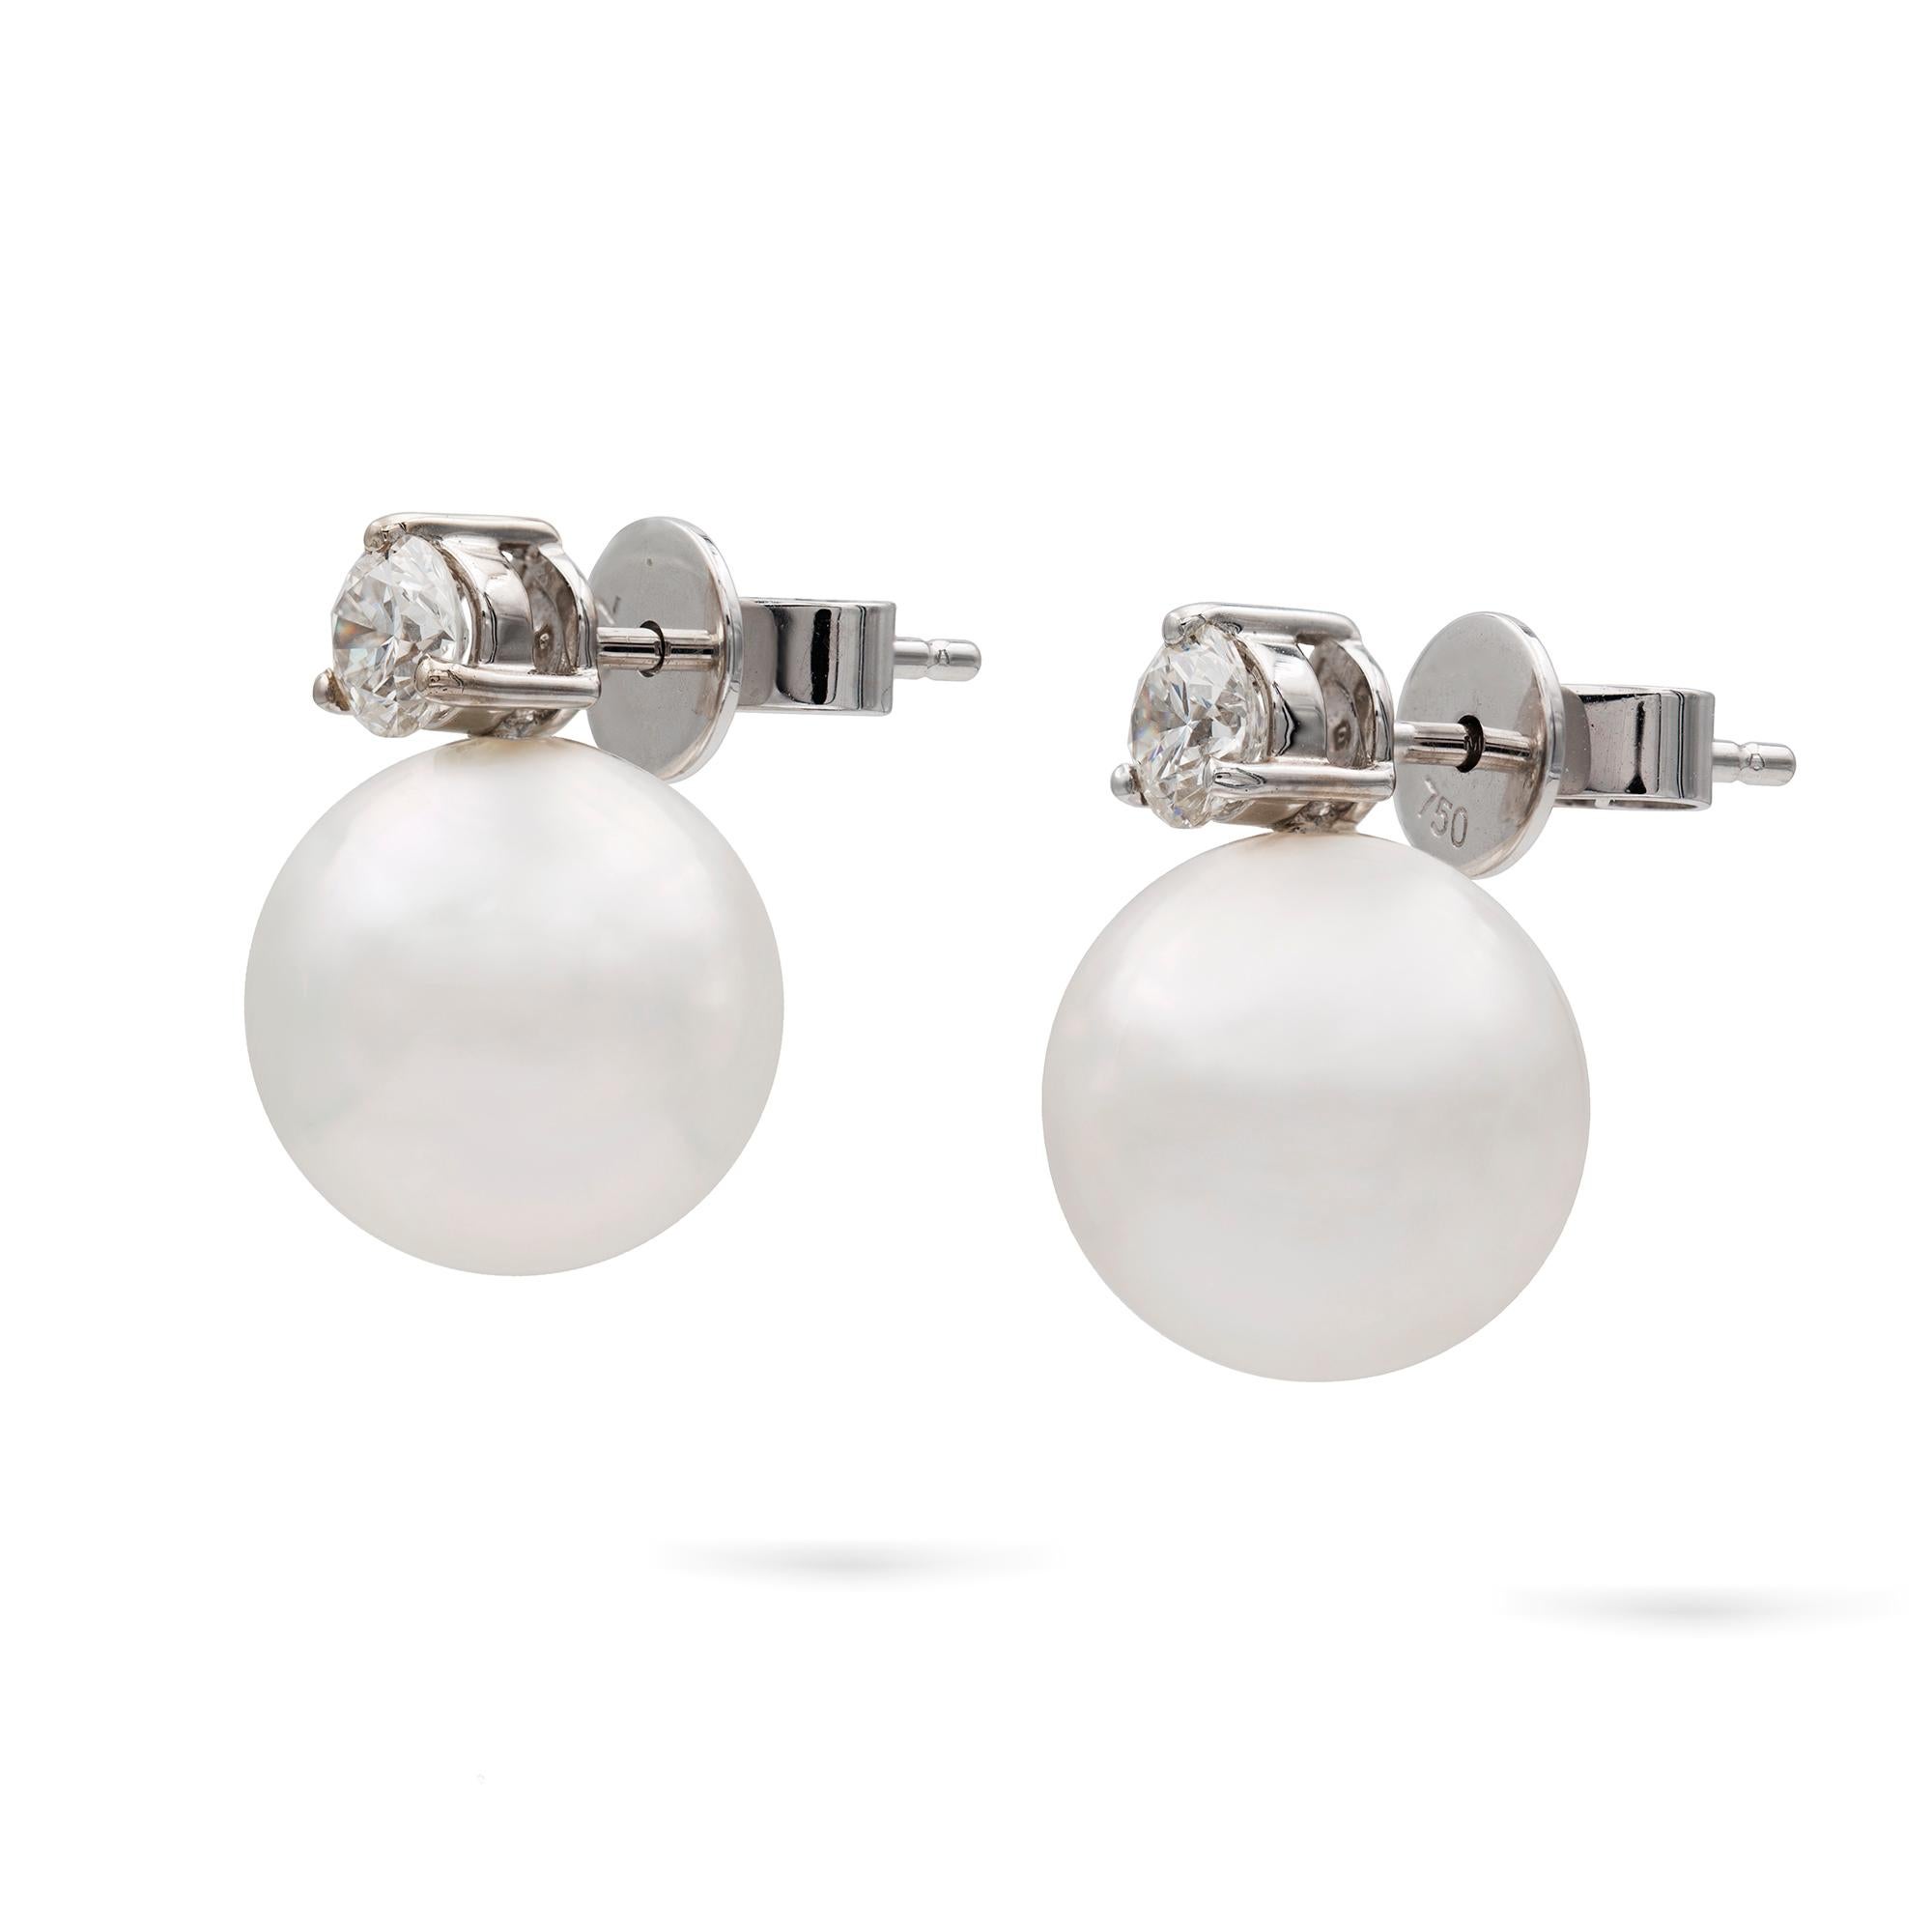 A pair of South Sea cultured pearl and diamond stud earrings, each earring consisting of a round pearl, approximately 11.5 mm in diameter, attached to a three claw-set round brilliant cut diamond top, weighing 0.56 carats in total, assessed colour